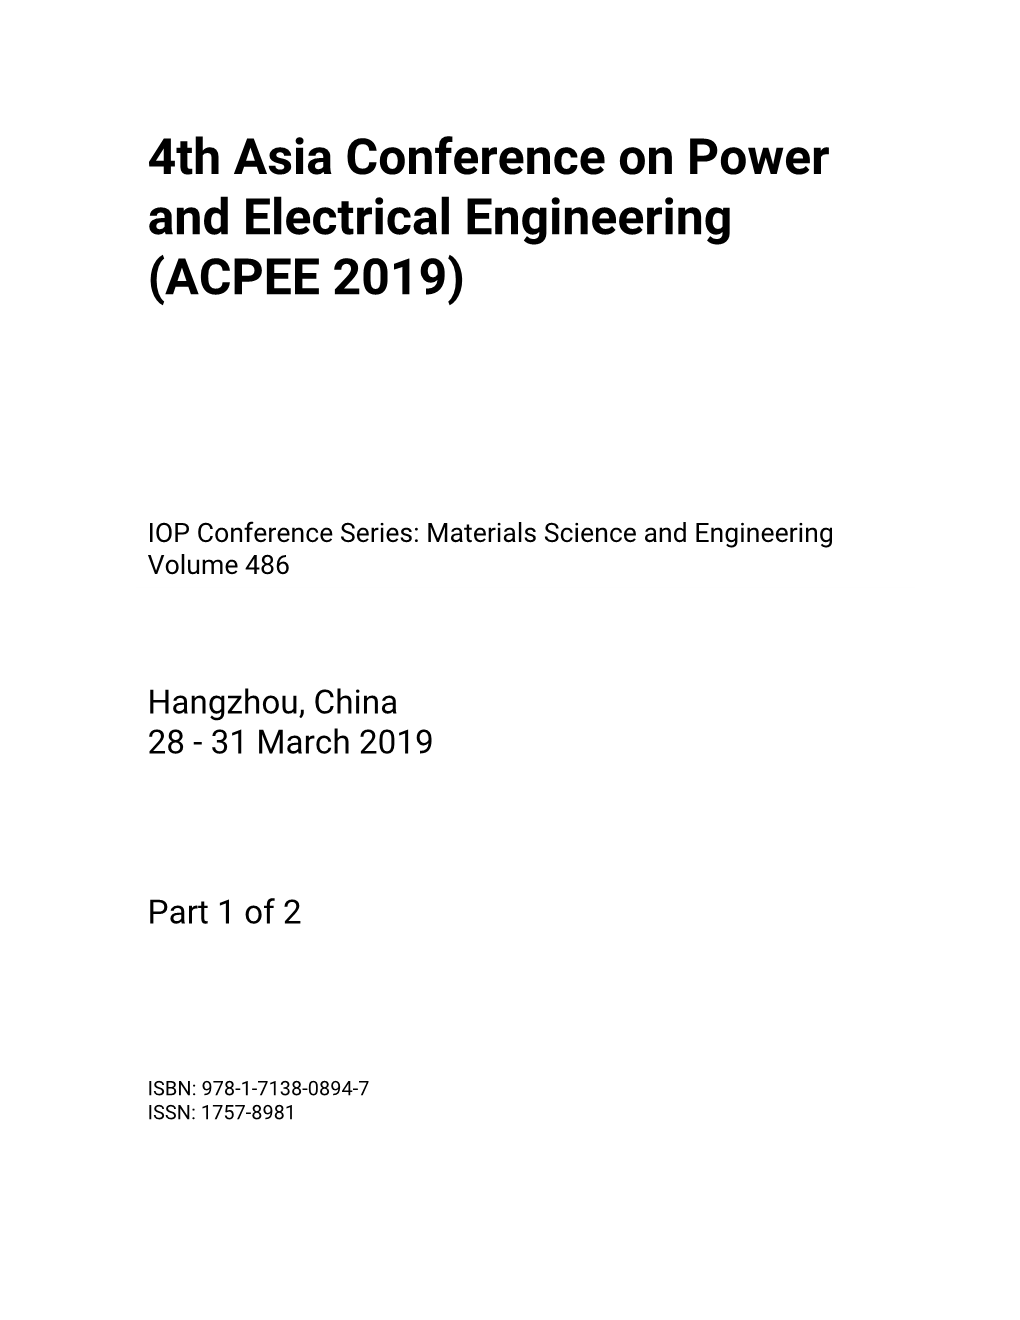 4Th Asia Conference on Power and Electrical Engineering